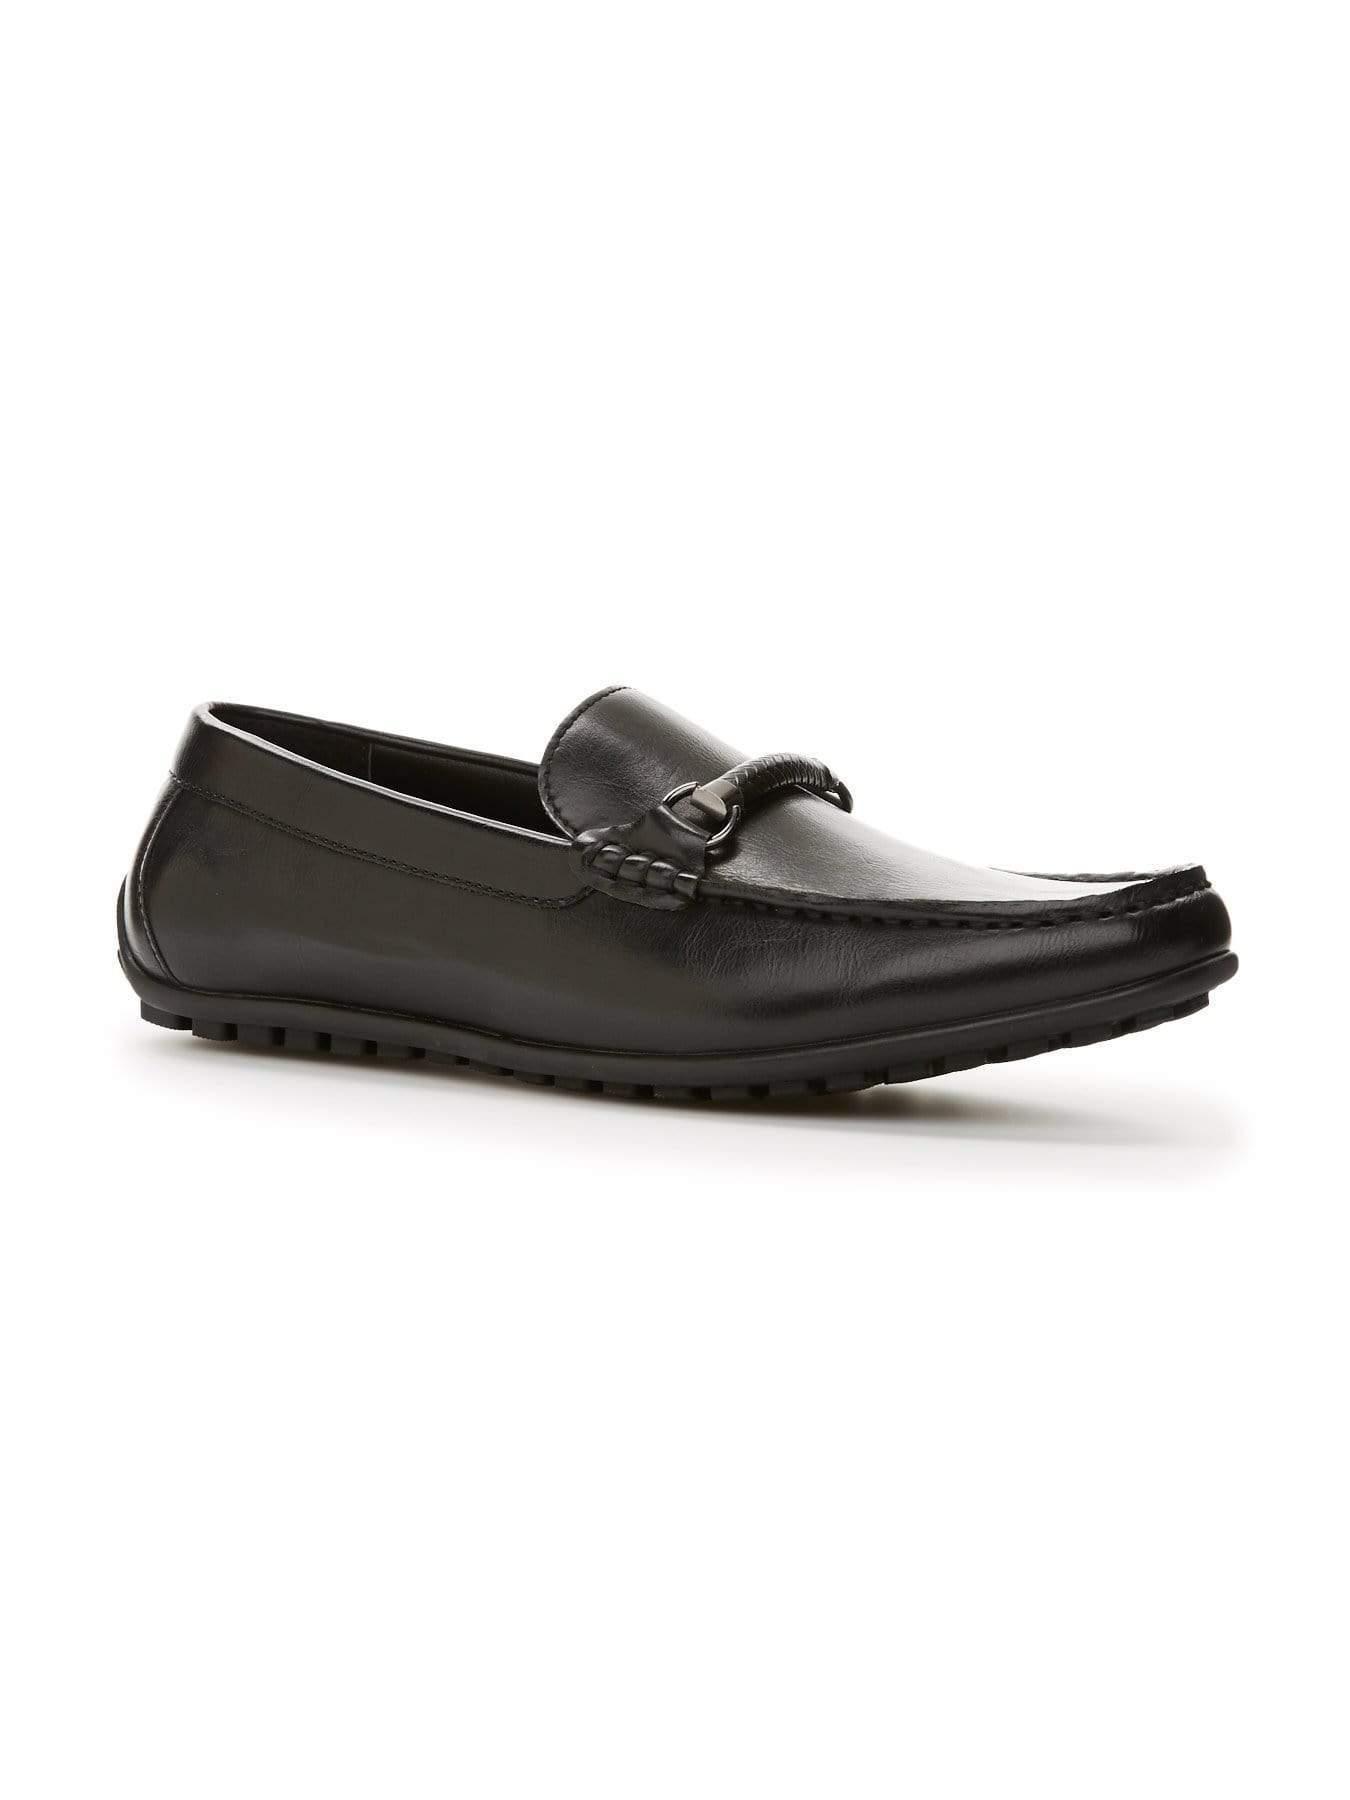 Perry Ellis Leather Morgan Loafer Shoe in Black for Men - Save 34% - Lyst